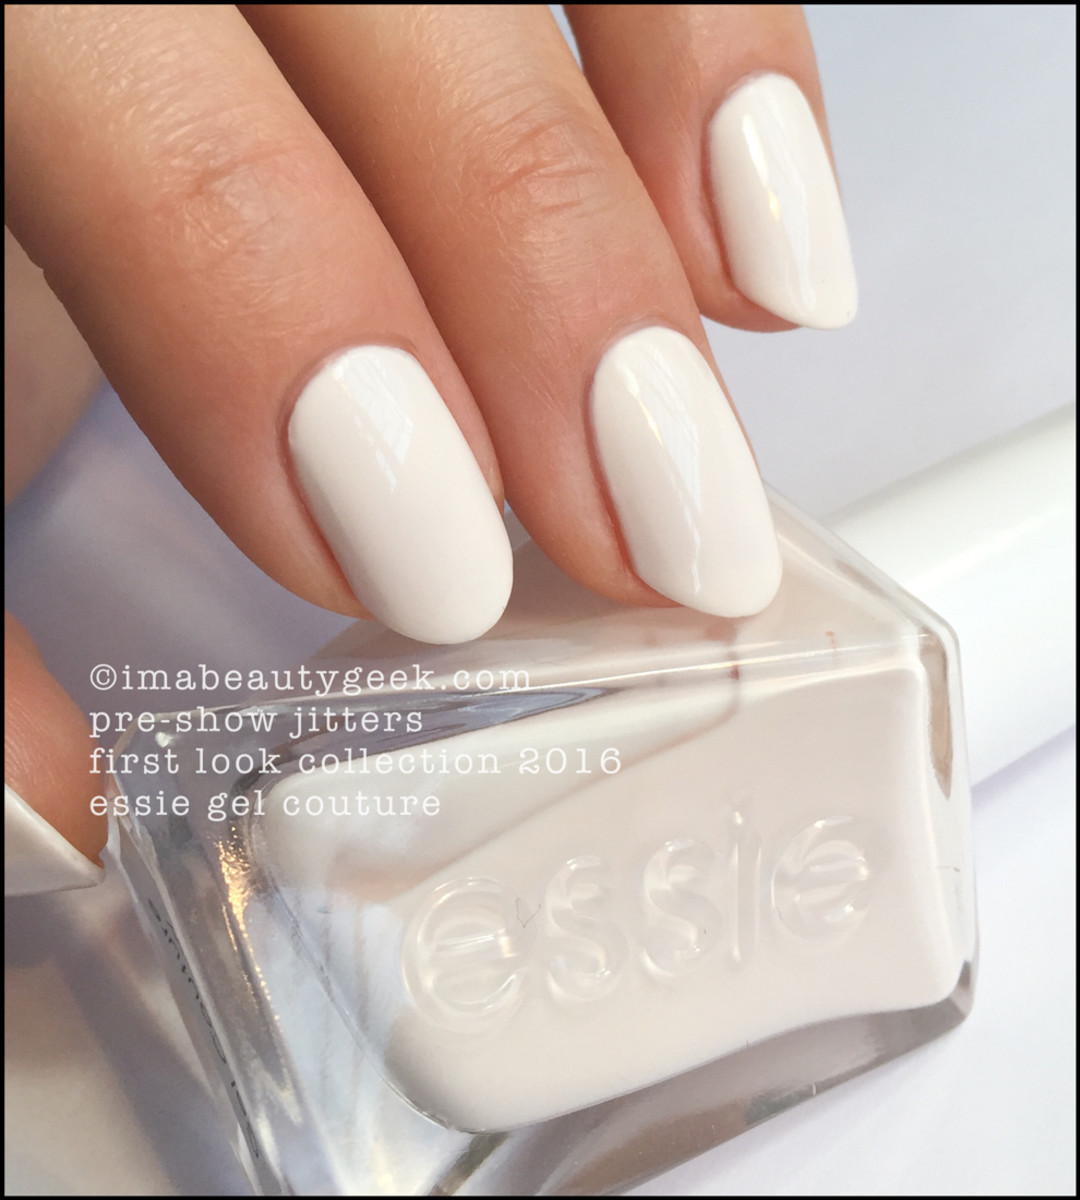 Essie Gel Couture Swatches Review_Essie Pre-Show Jitters